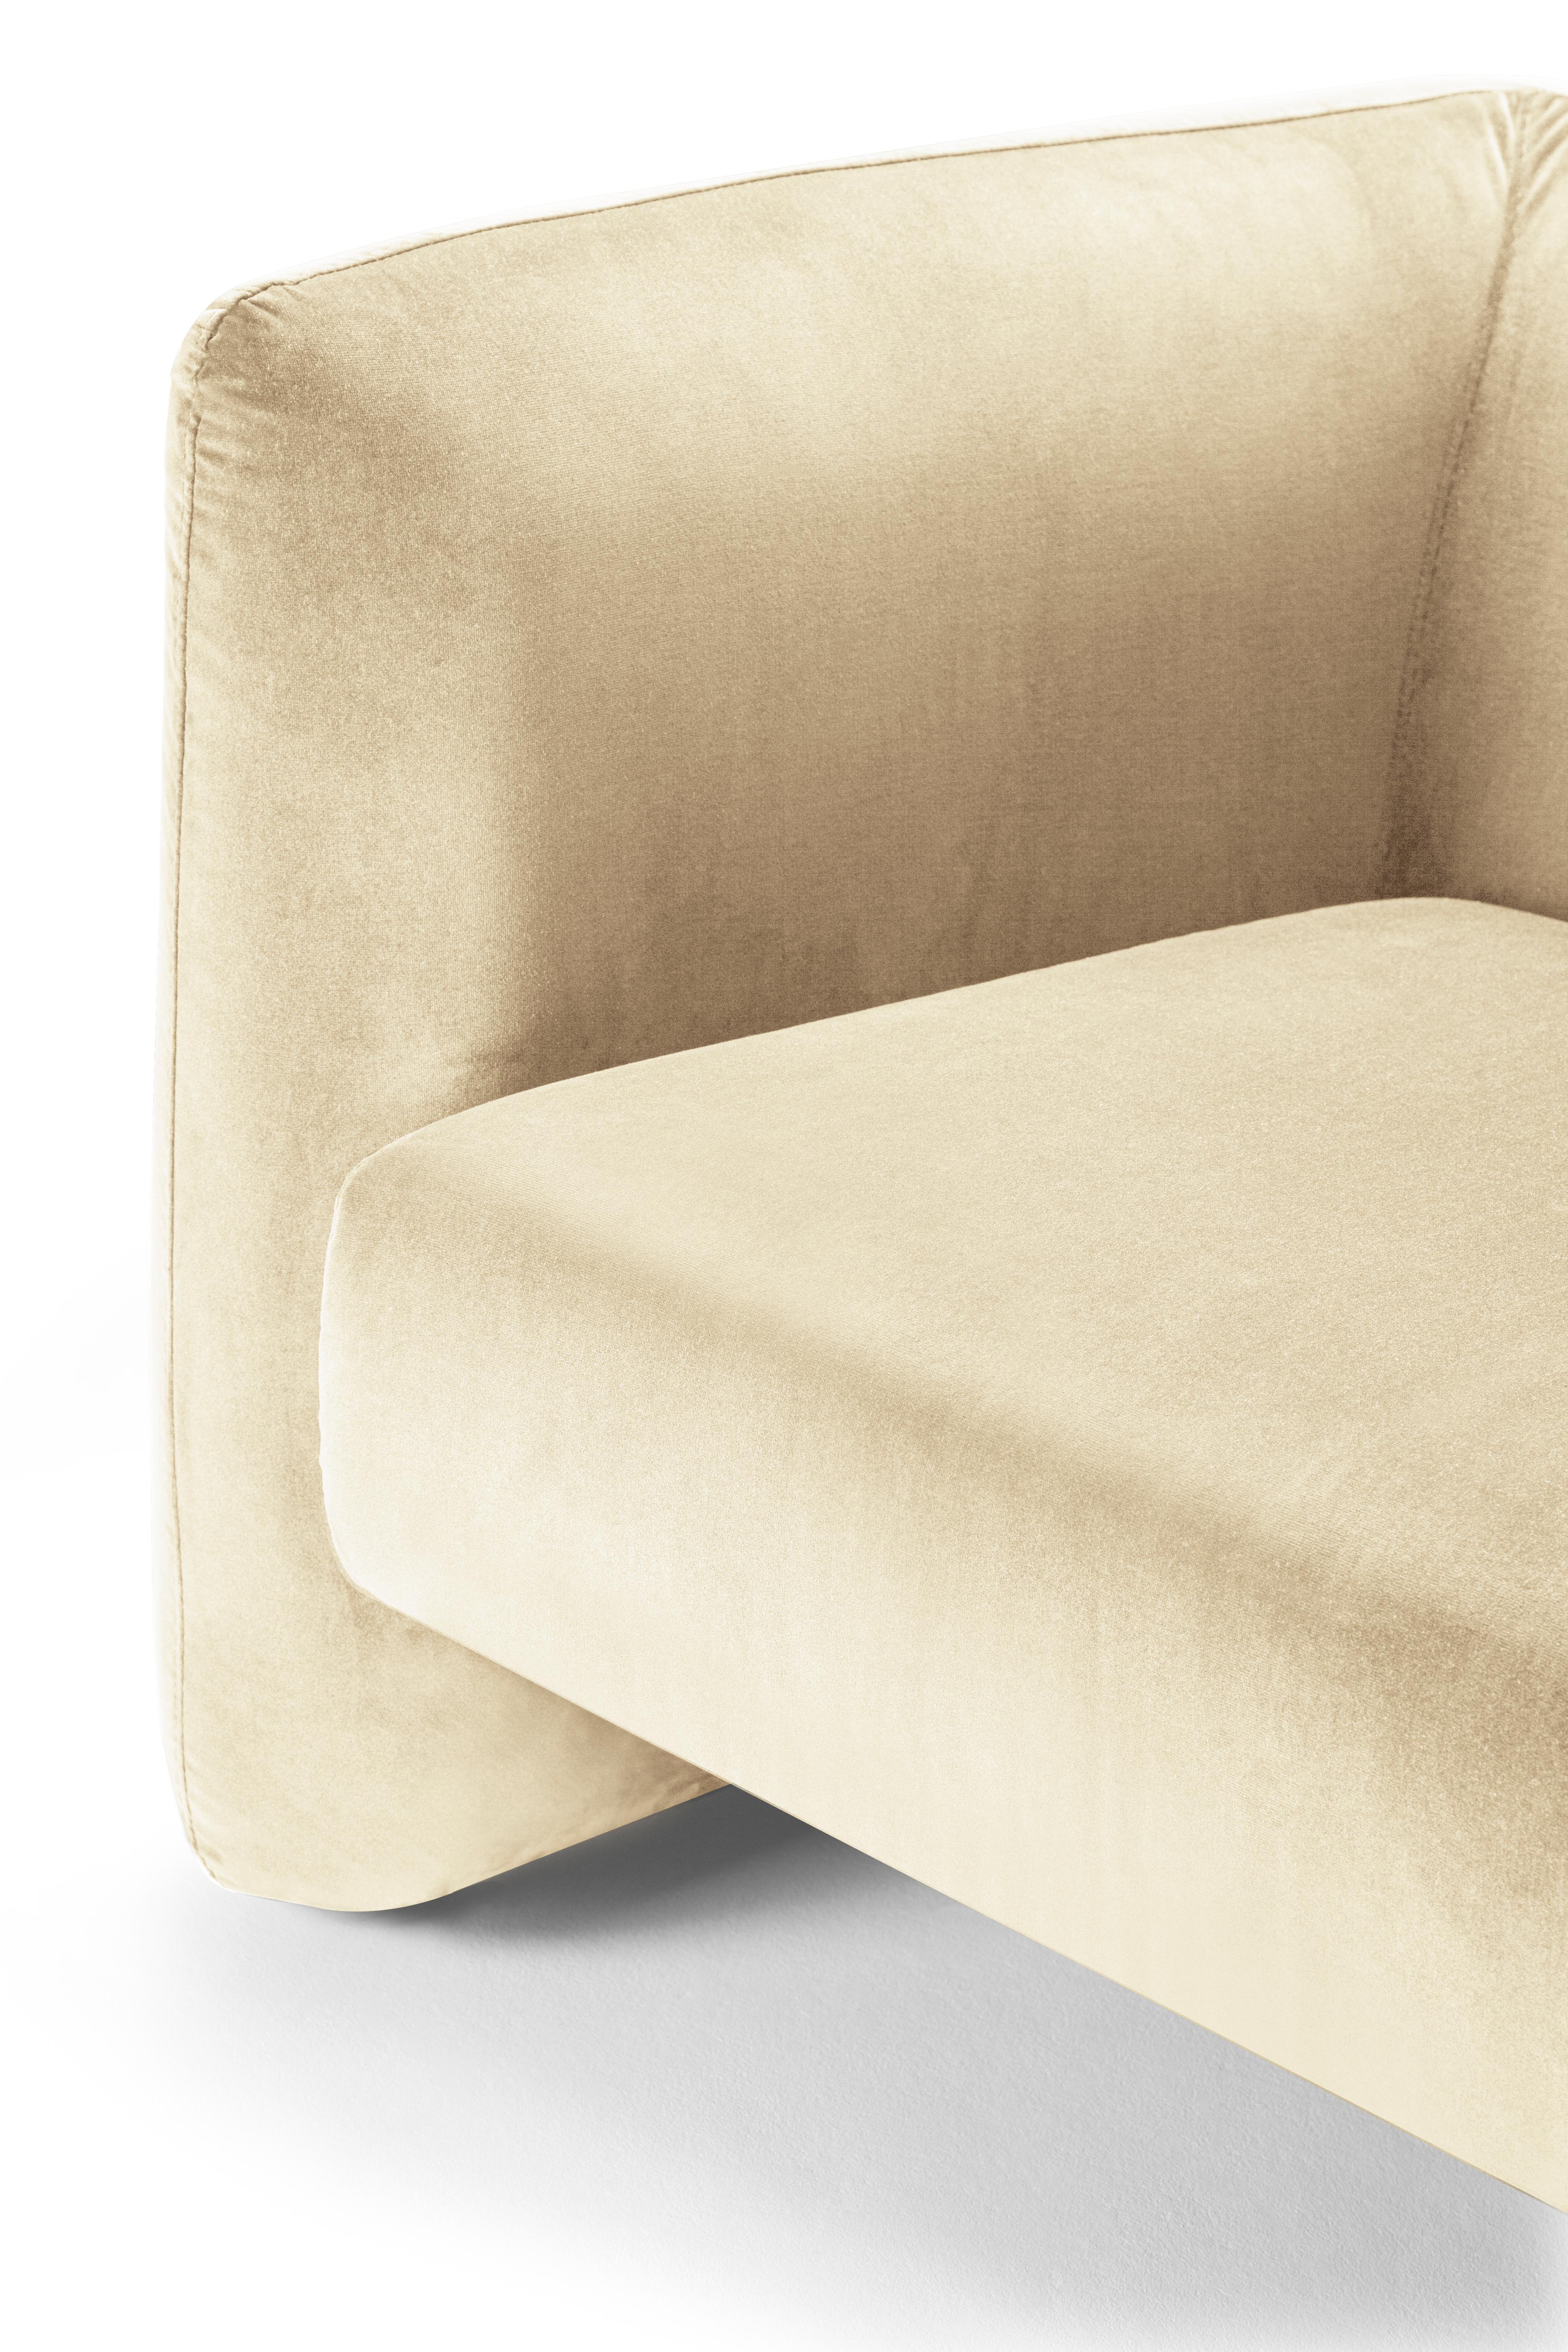 Contemporary Modern Jacob Armchair in Beige Velvet Fabric by Collector Studio

This fun and sophisticated 21st century armchair designed by Collector Studio, with its simple shape and attractive color game along with other possible combinations of